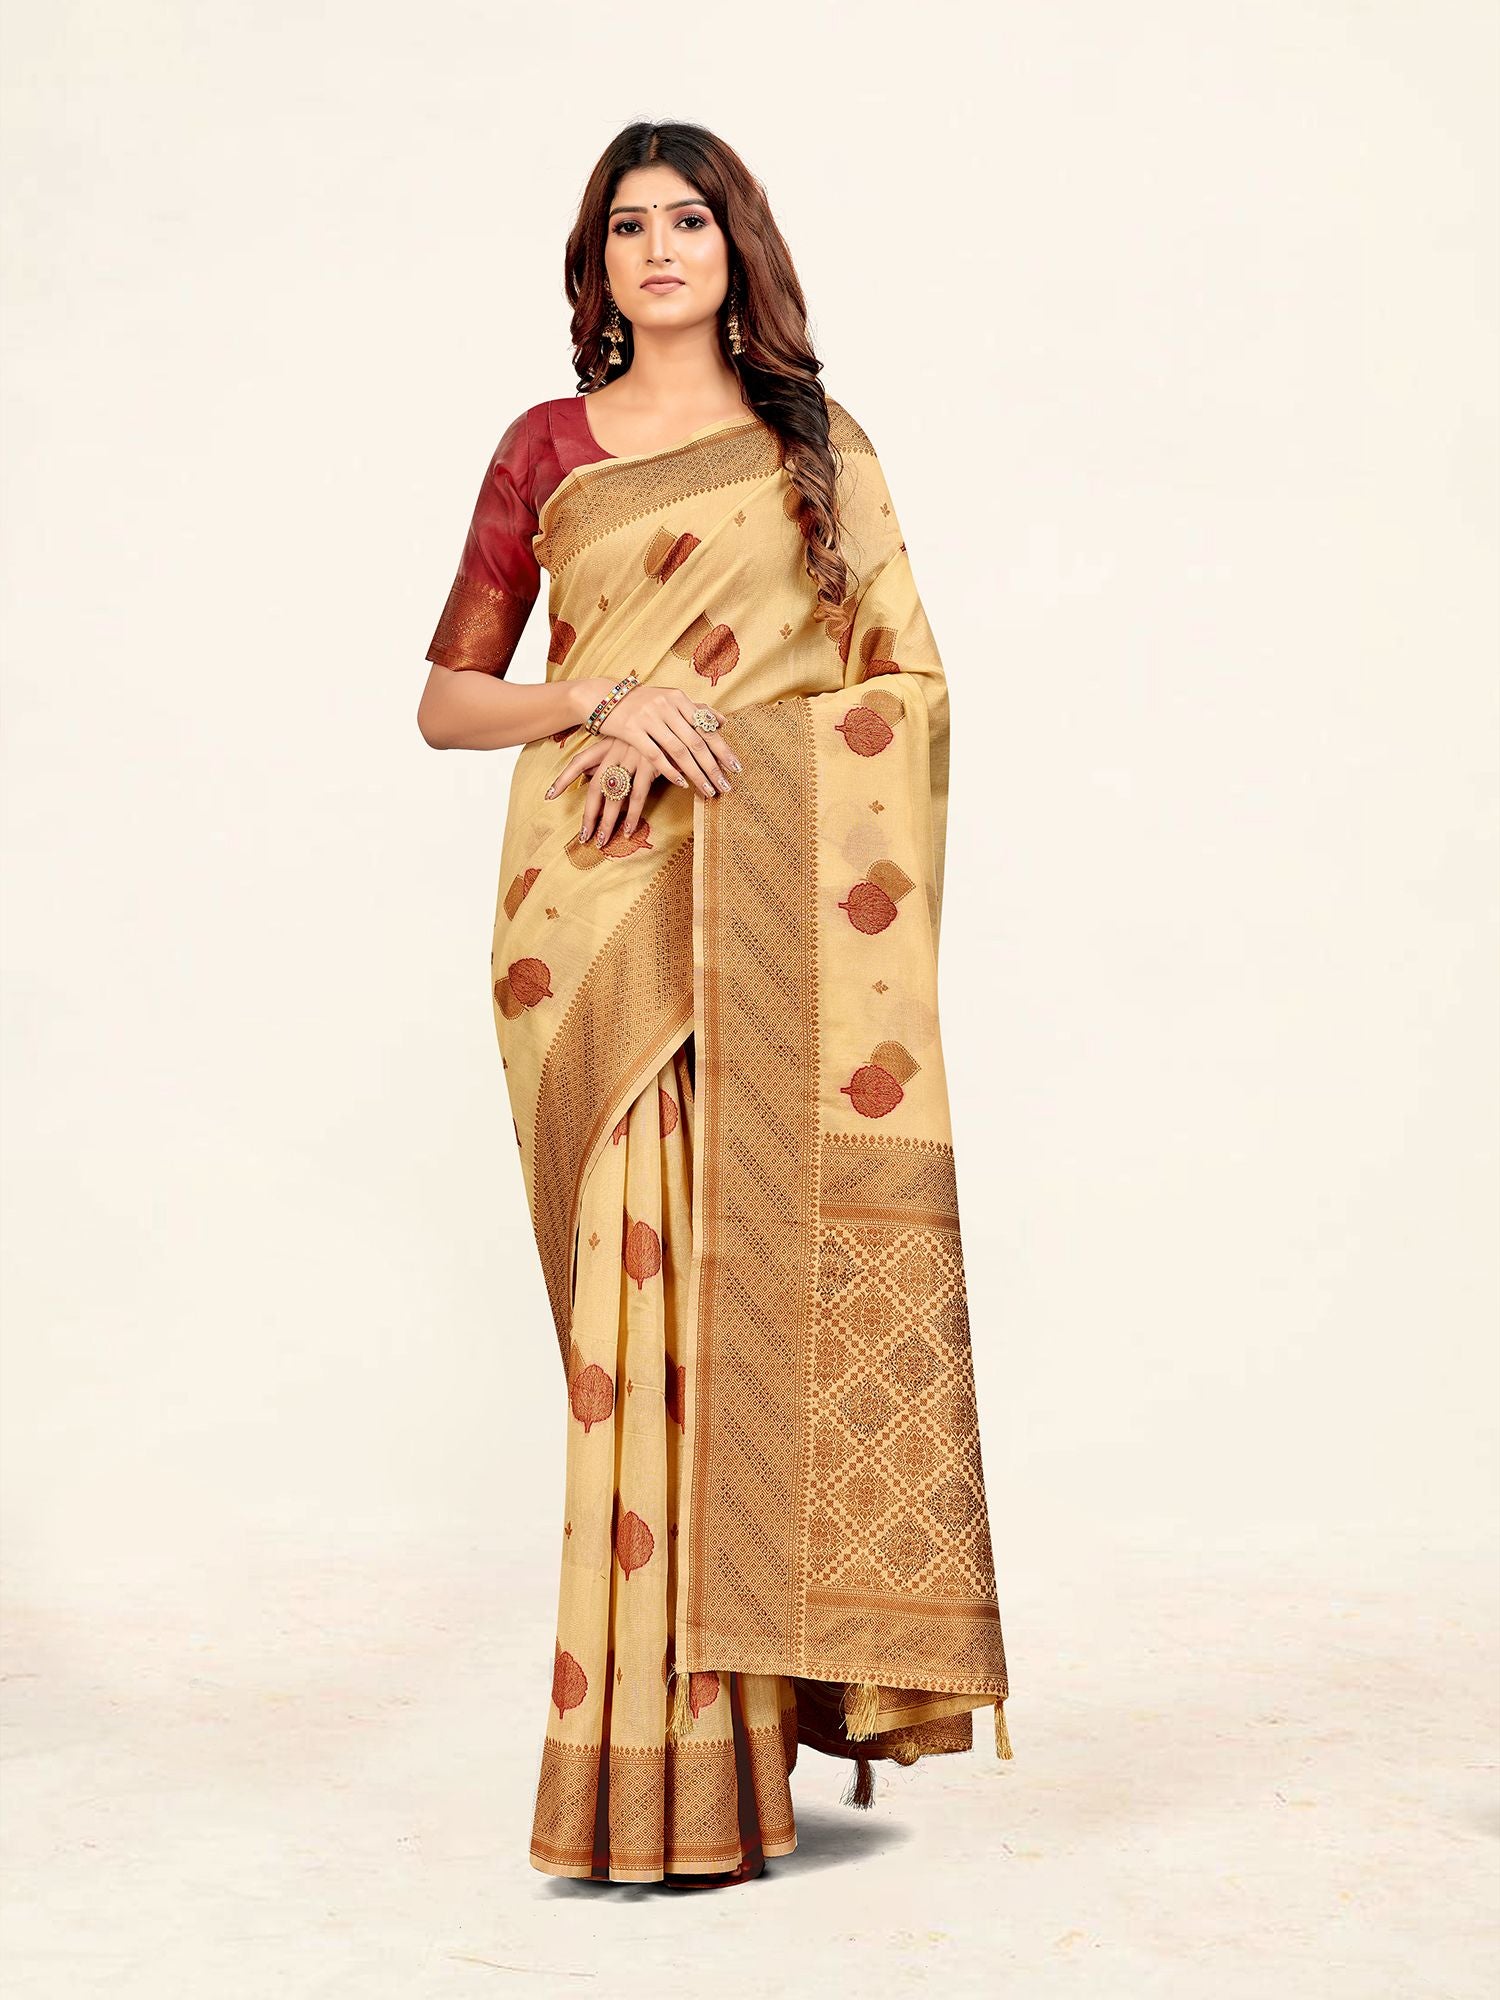 Women's Beige Color Stylish Saree With Blouse Set - Sweet Smile